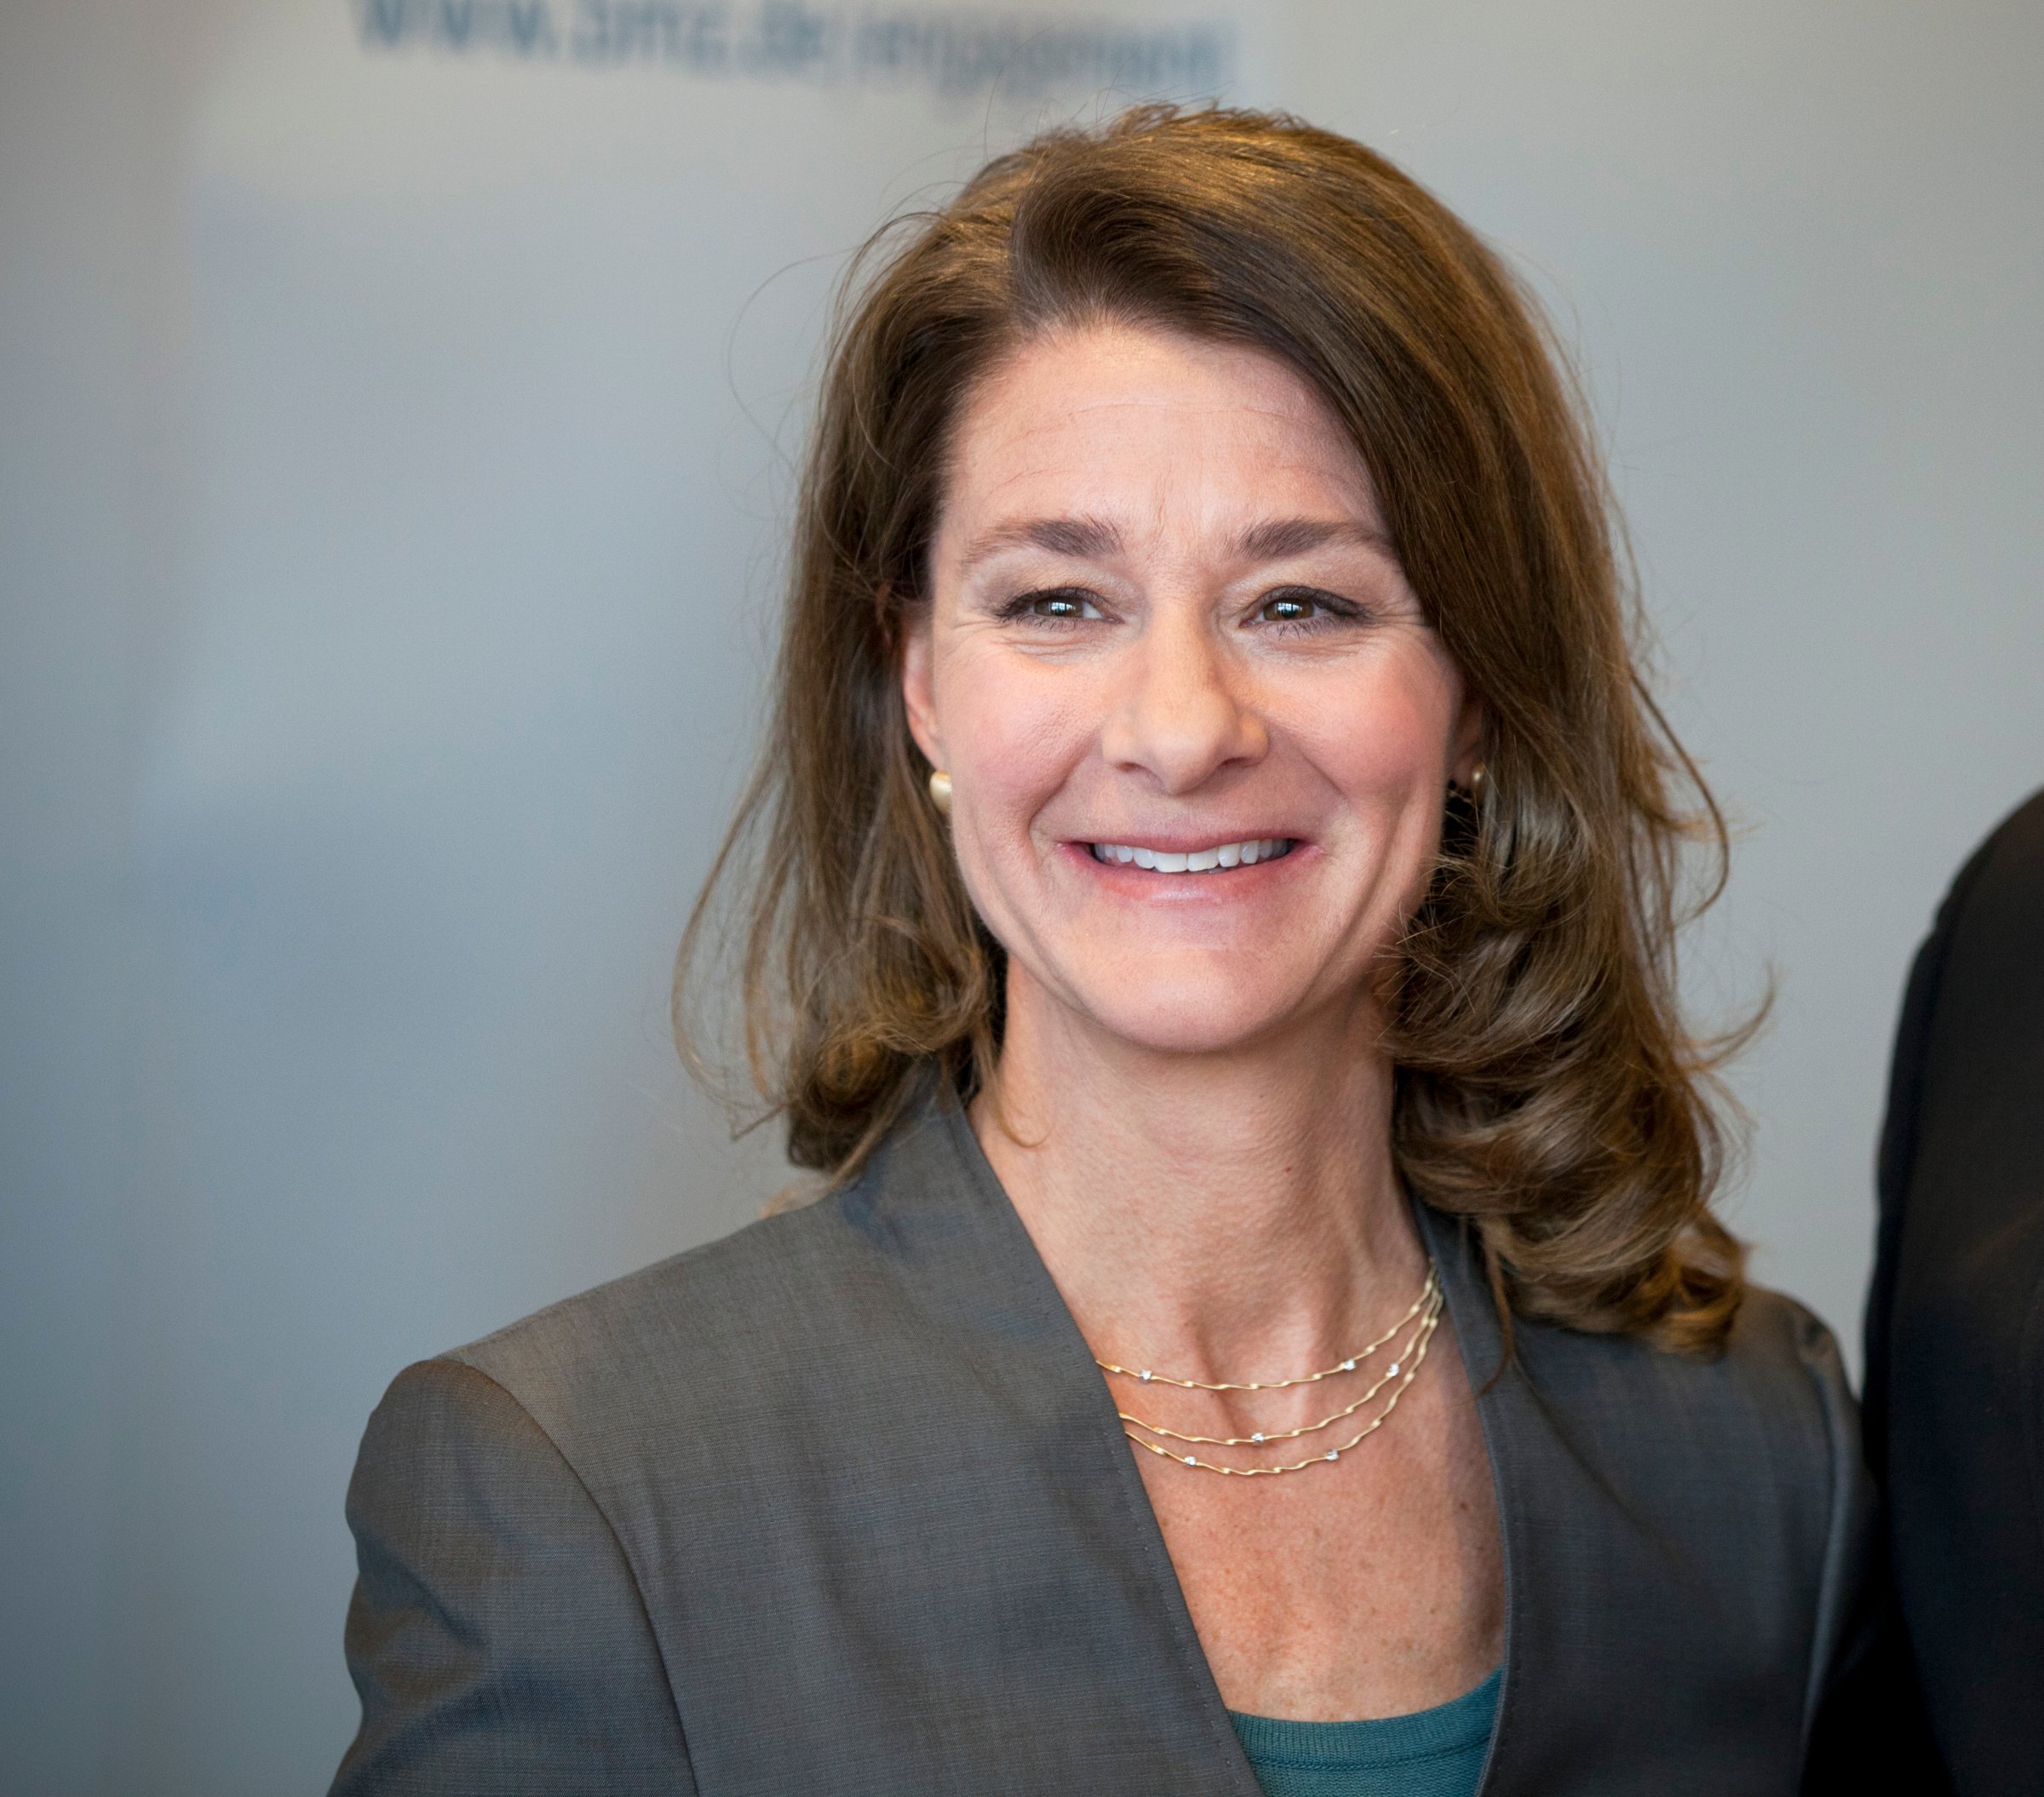 Melinda Gates: it's time to save the rest of the babies